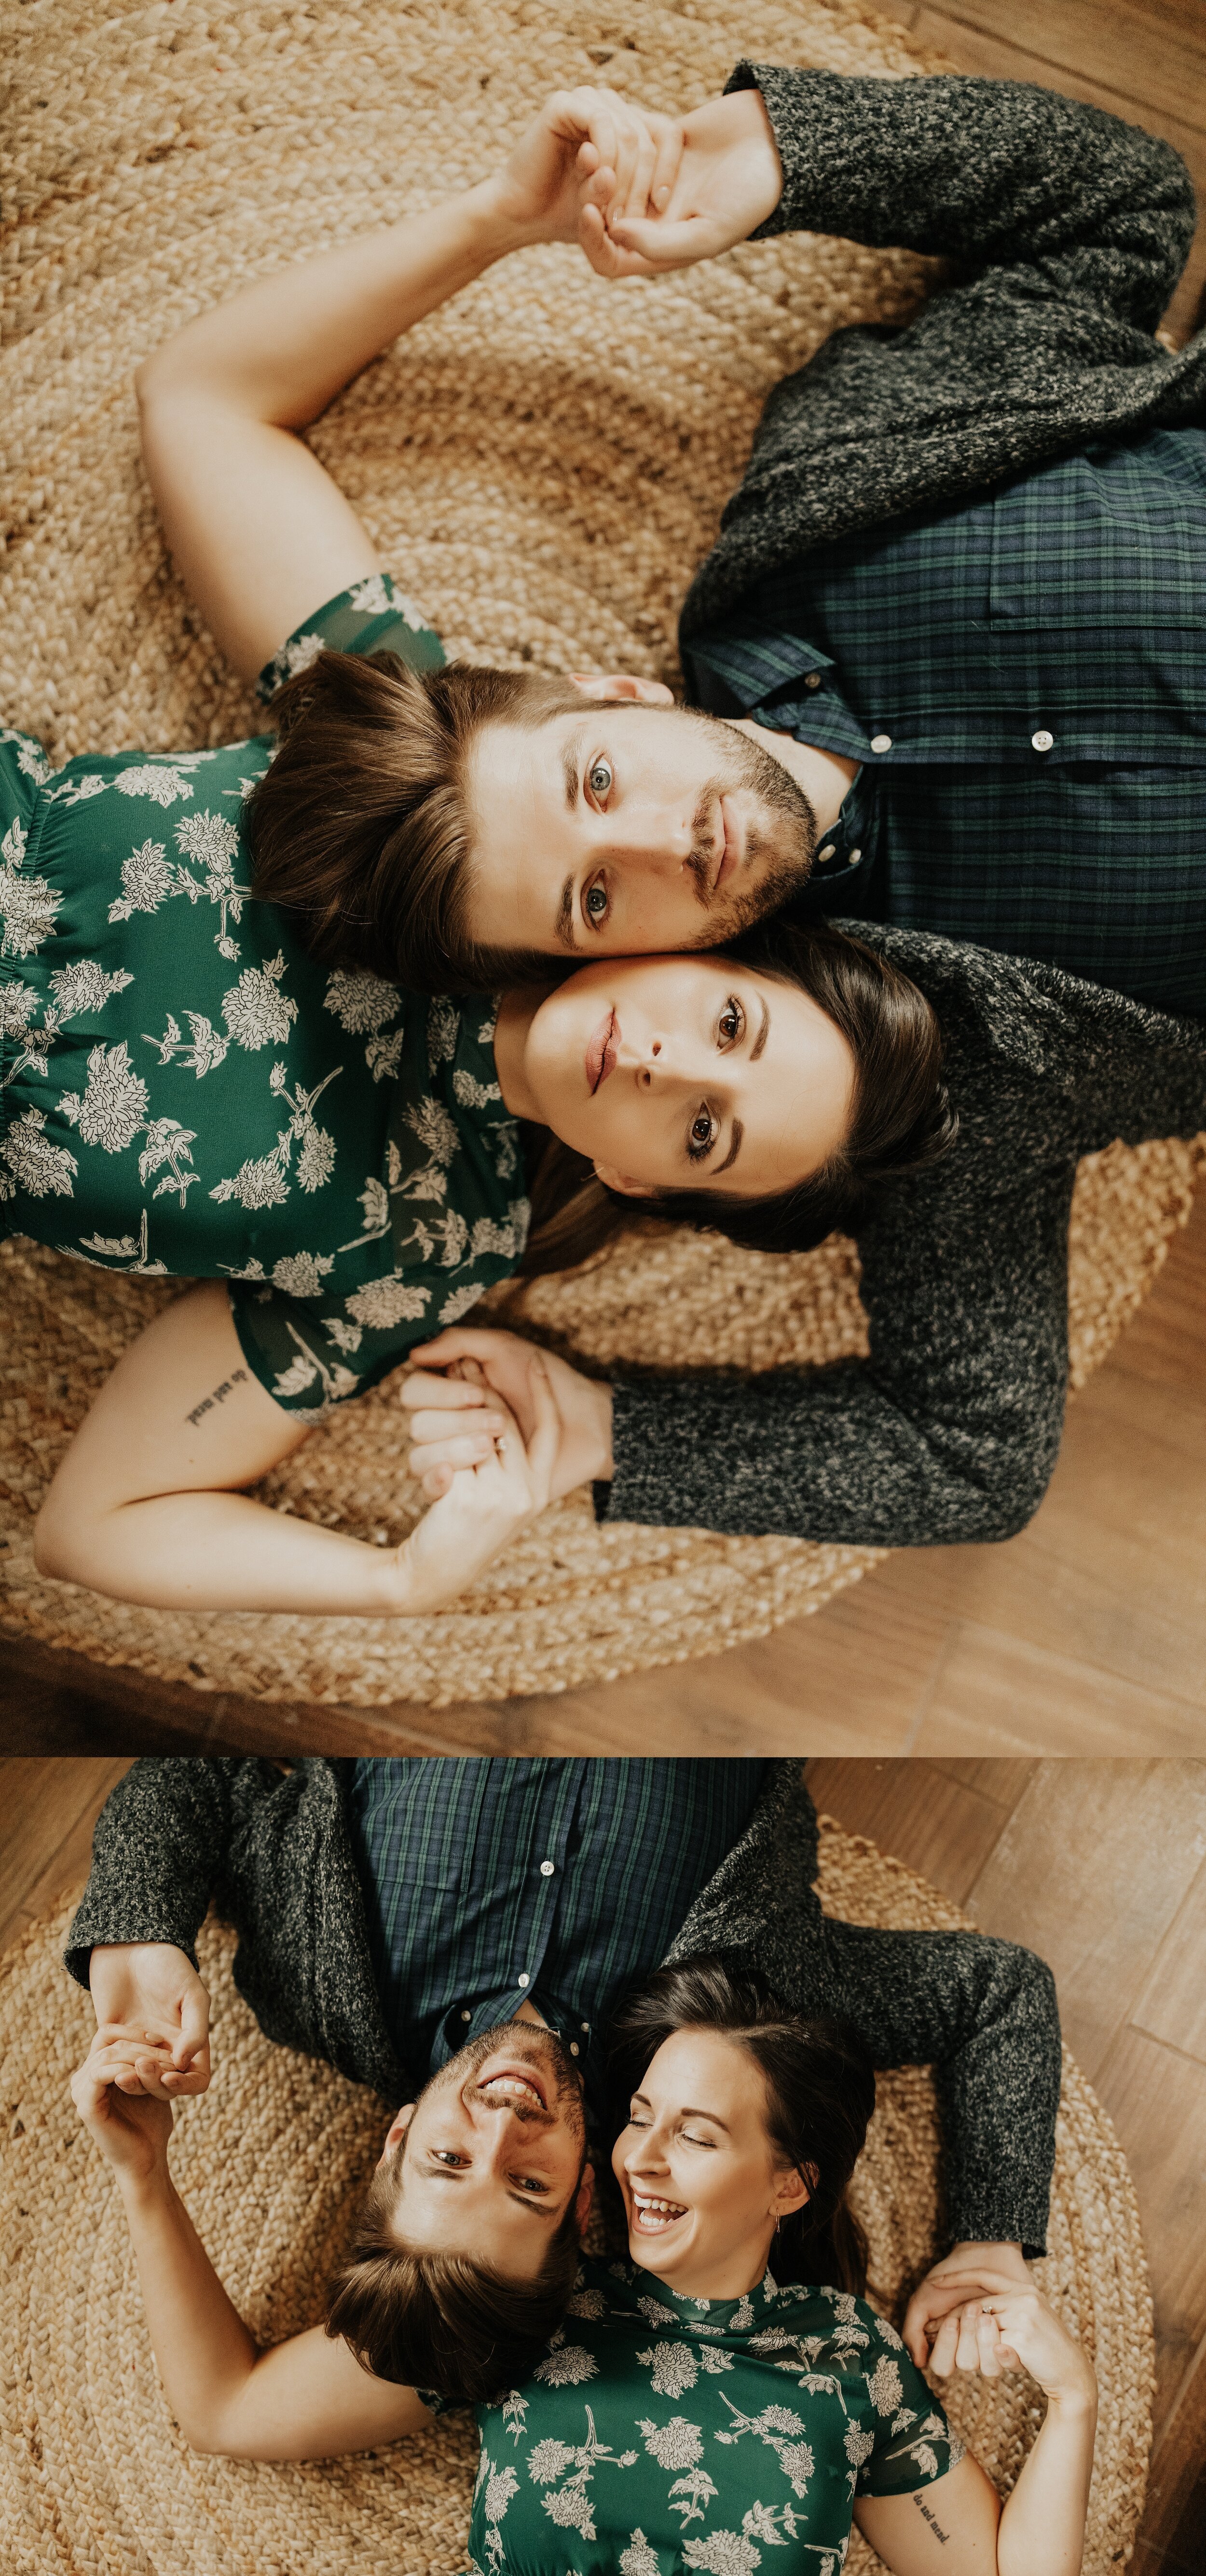 jessika-christine-photography-in+home-engagement-couples-cozy-adventurous-session (16).jpg